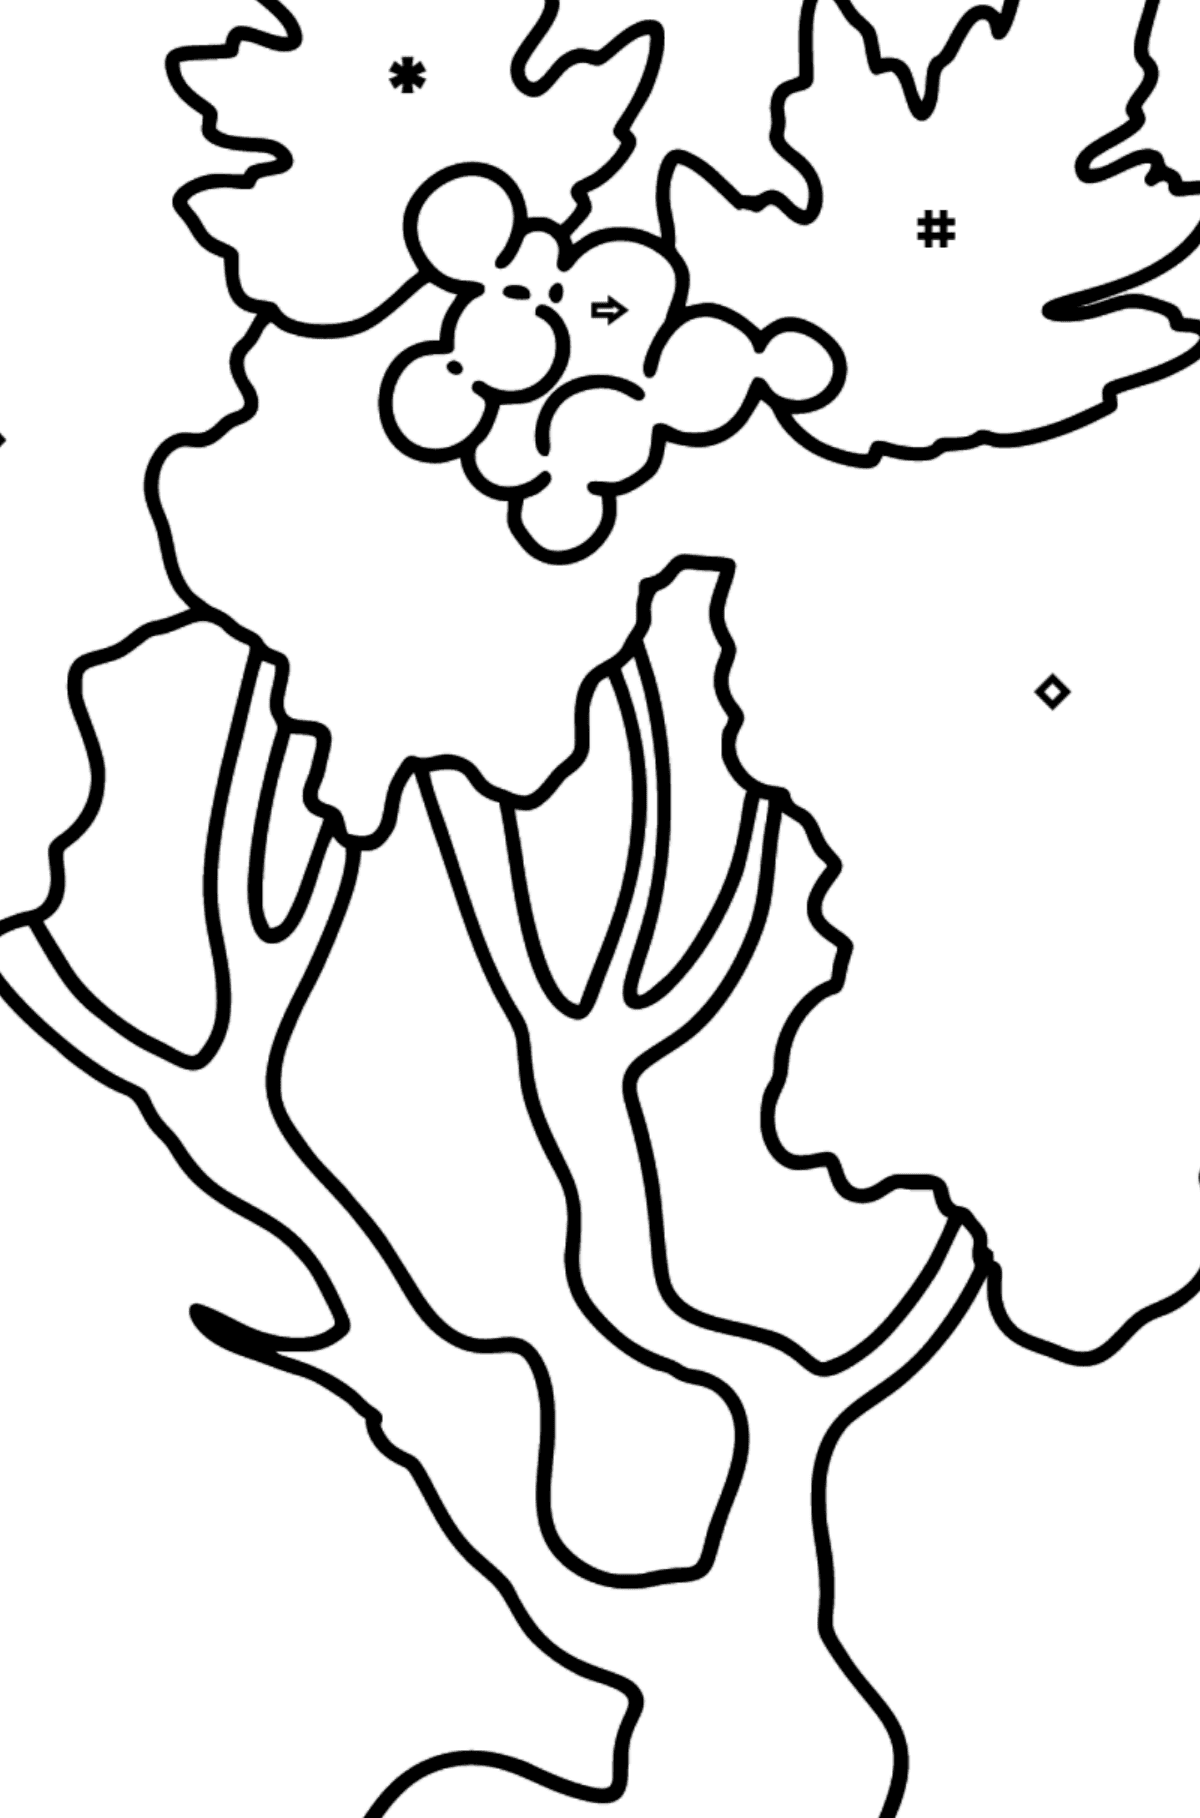 Hawthorn coloring page - Coloring by Symbols and Geometric Shapes for Kids